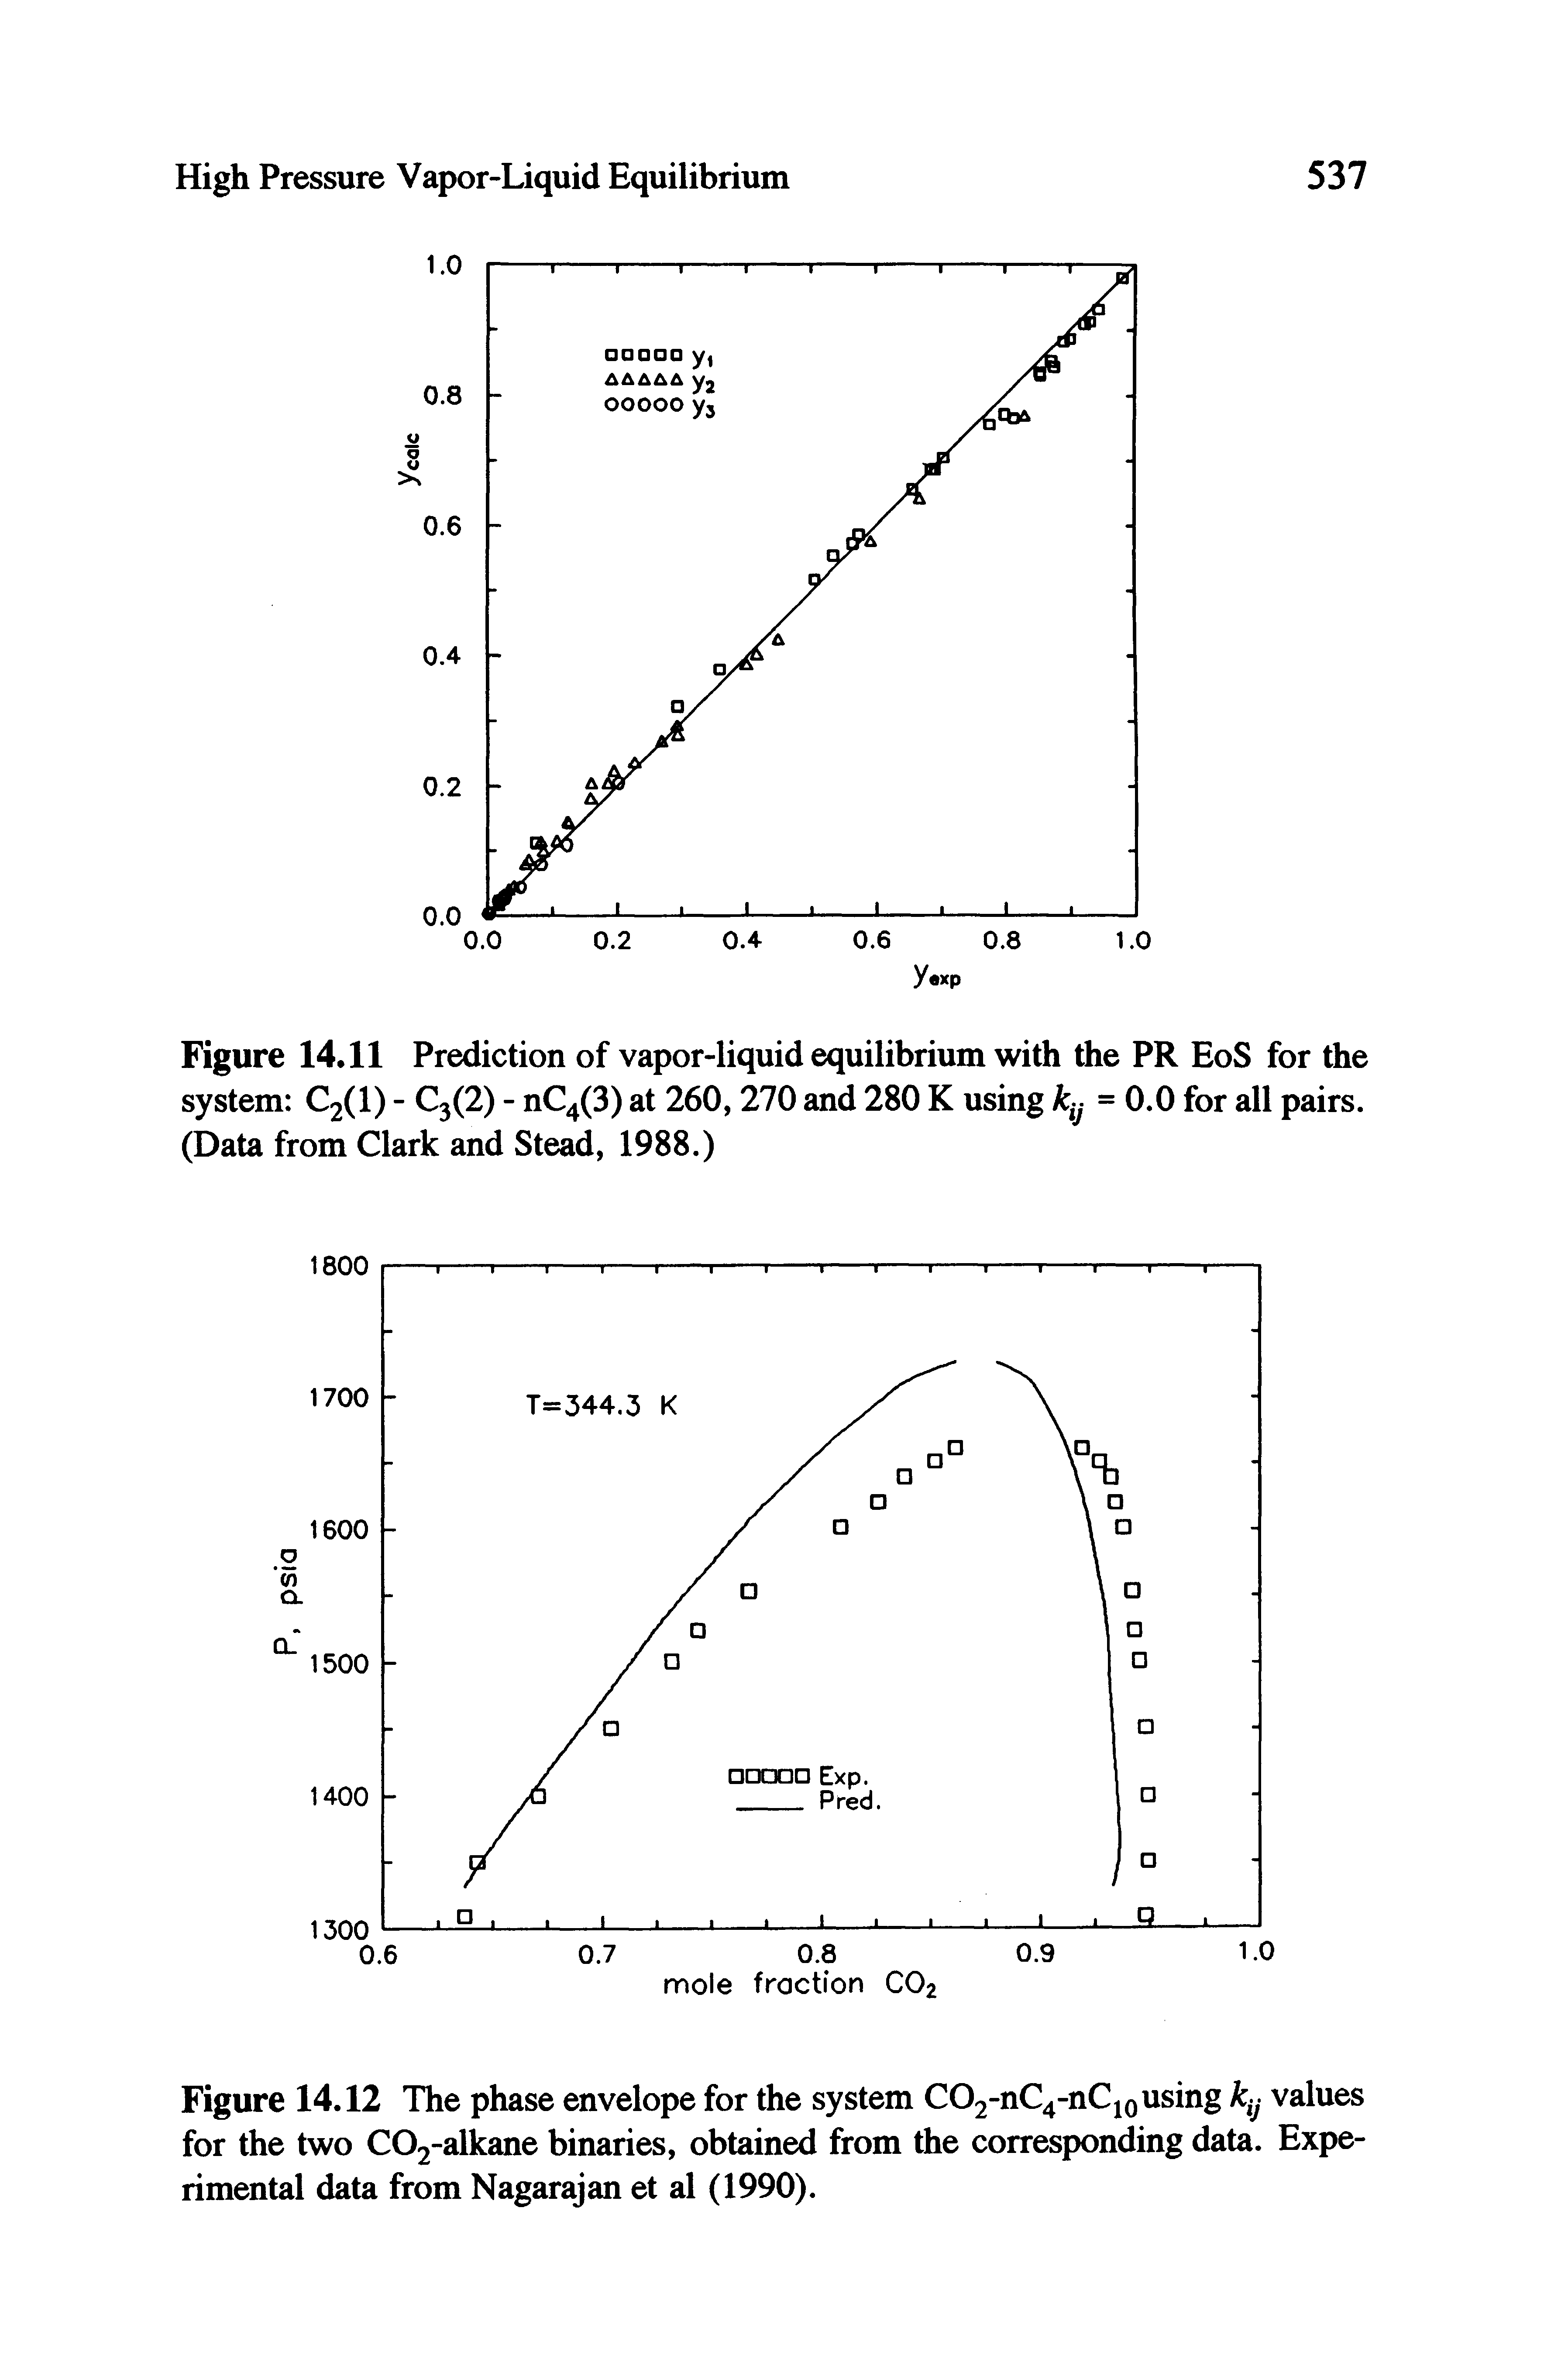 Figure 14.11 Prediction of vapor-liquid equilibrium with the PR EoS for the system 2(1) - C (2) - nC4(3) at 260,270 and 280 K using k j = 0.0 for all pairs. (Data from Clark and Stead, 1988.)...